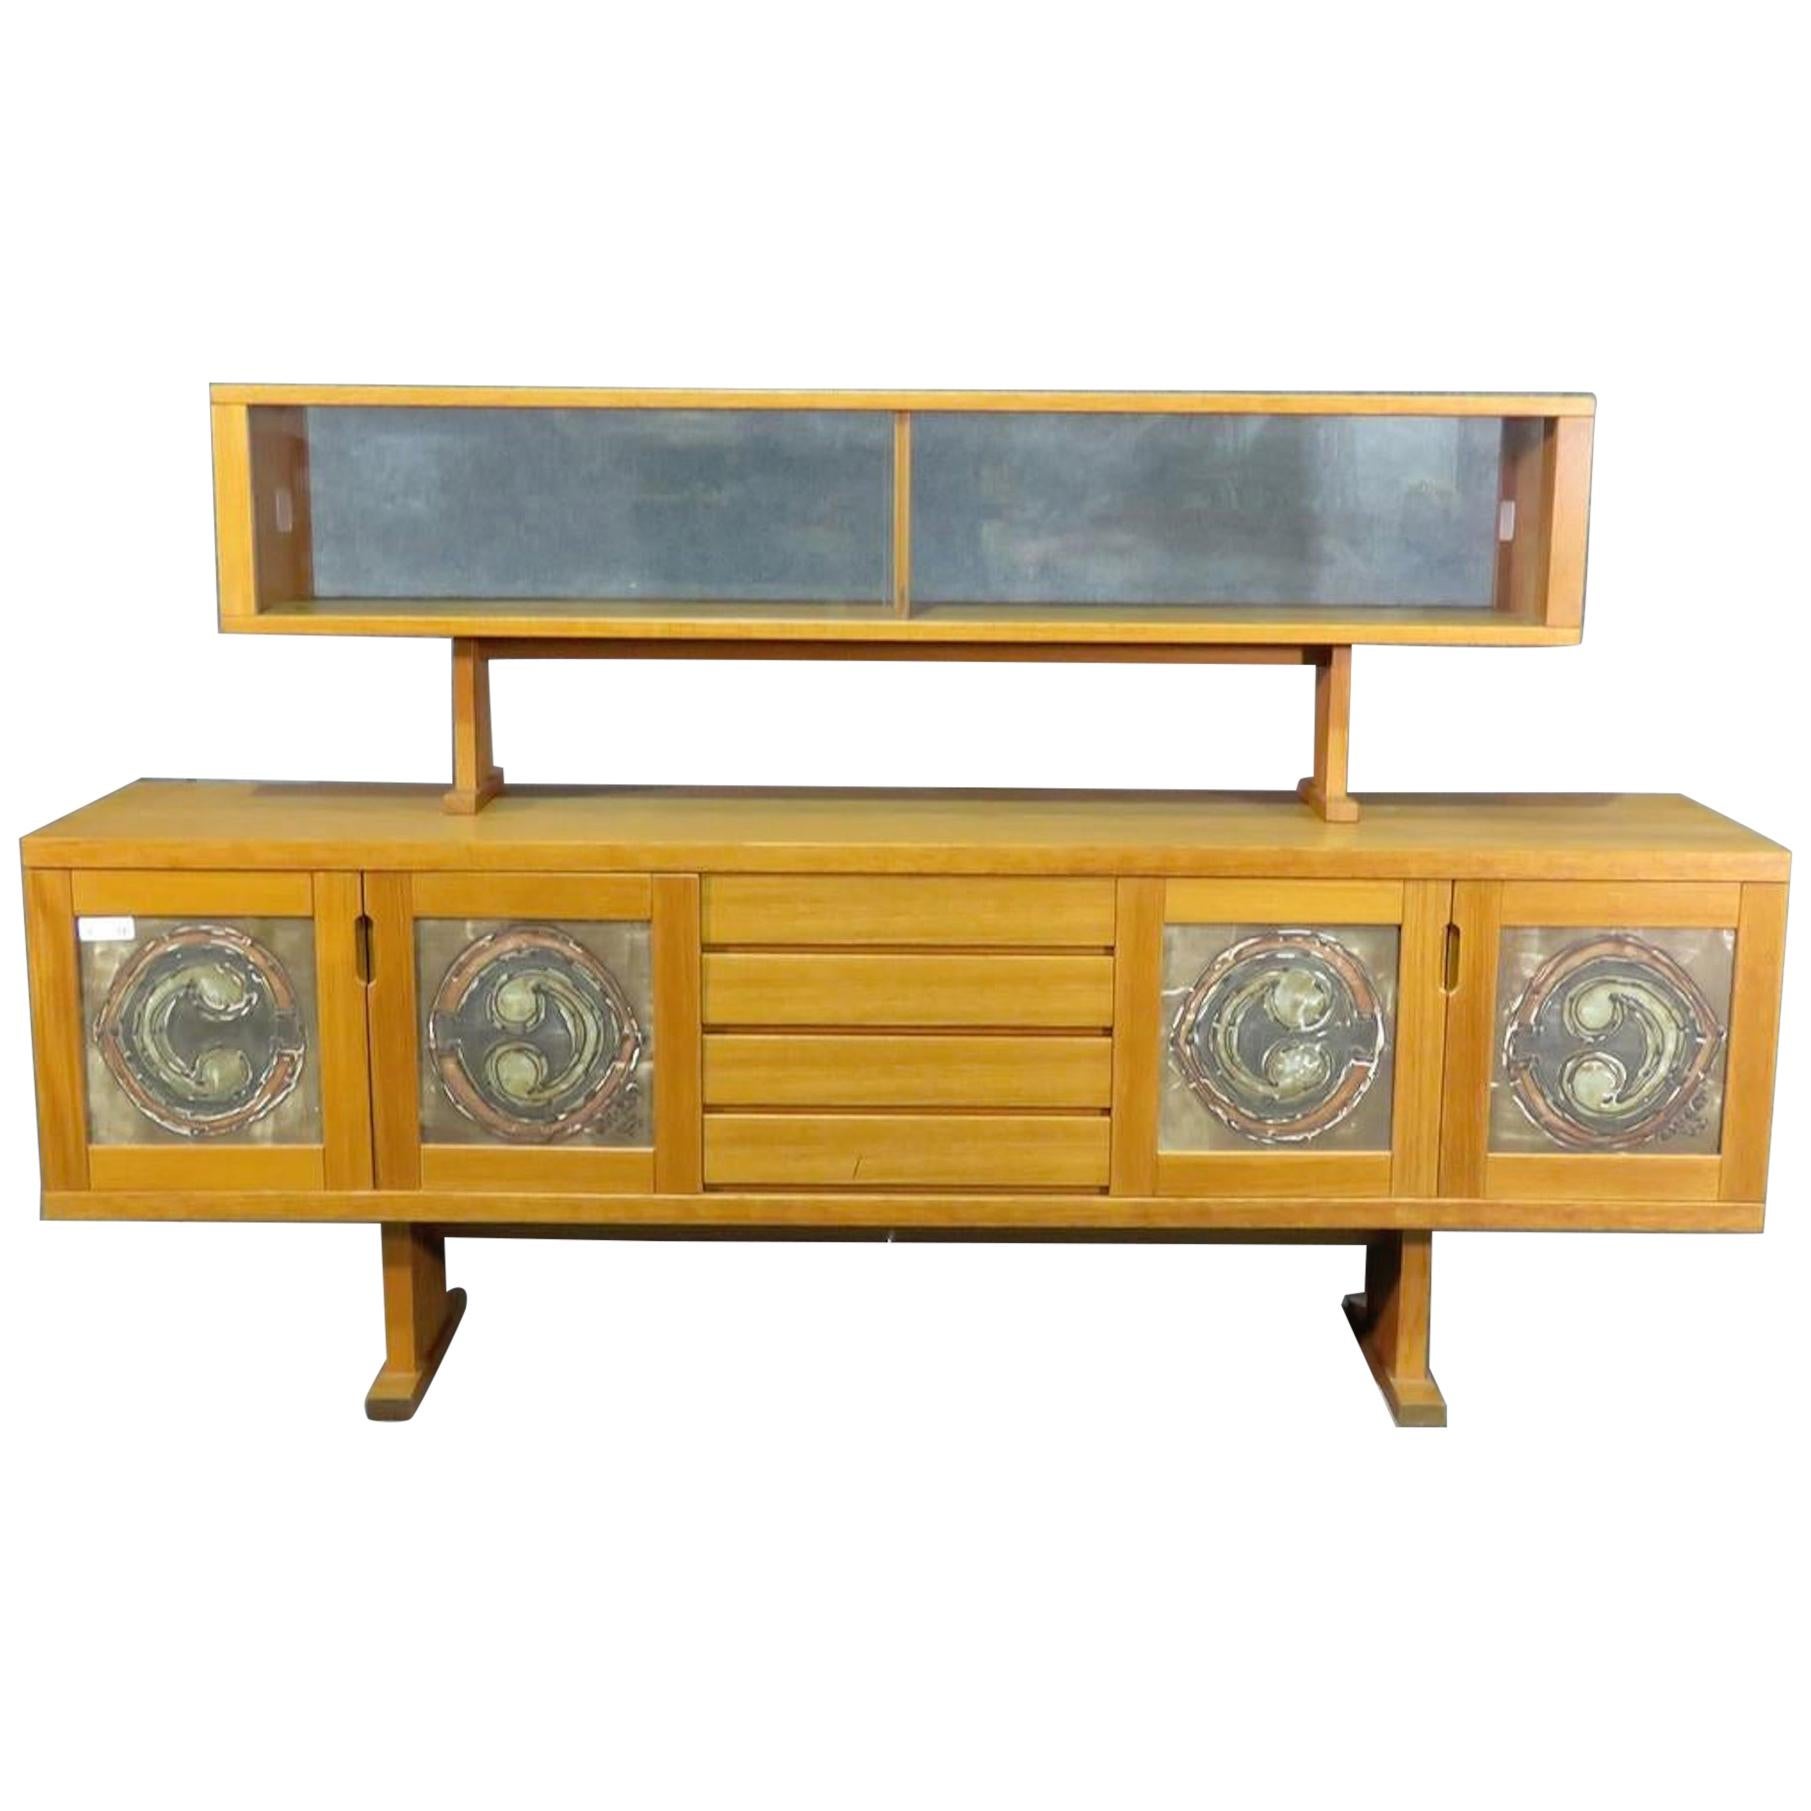 Danish Midcentury Credenza with Tile For Sale